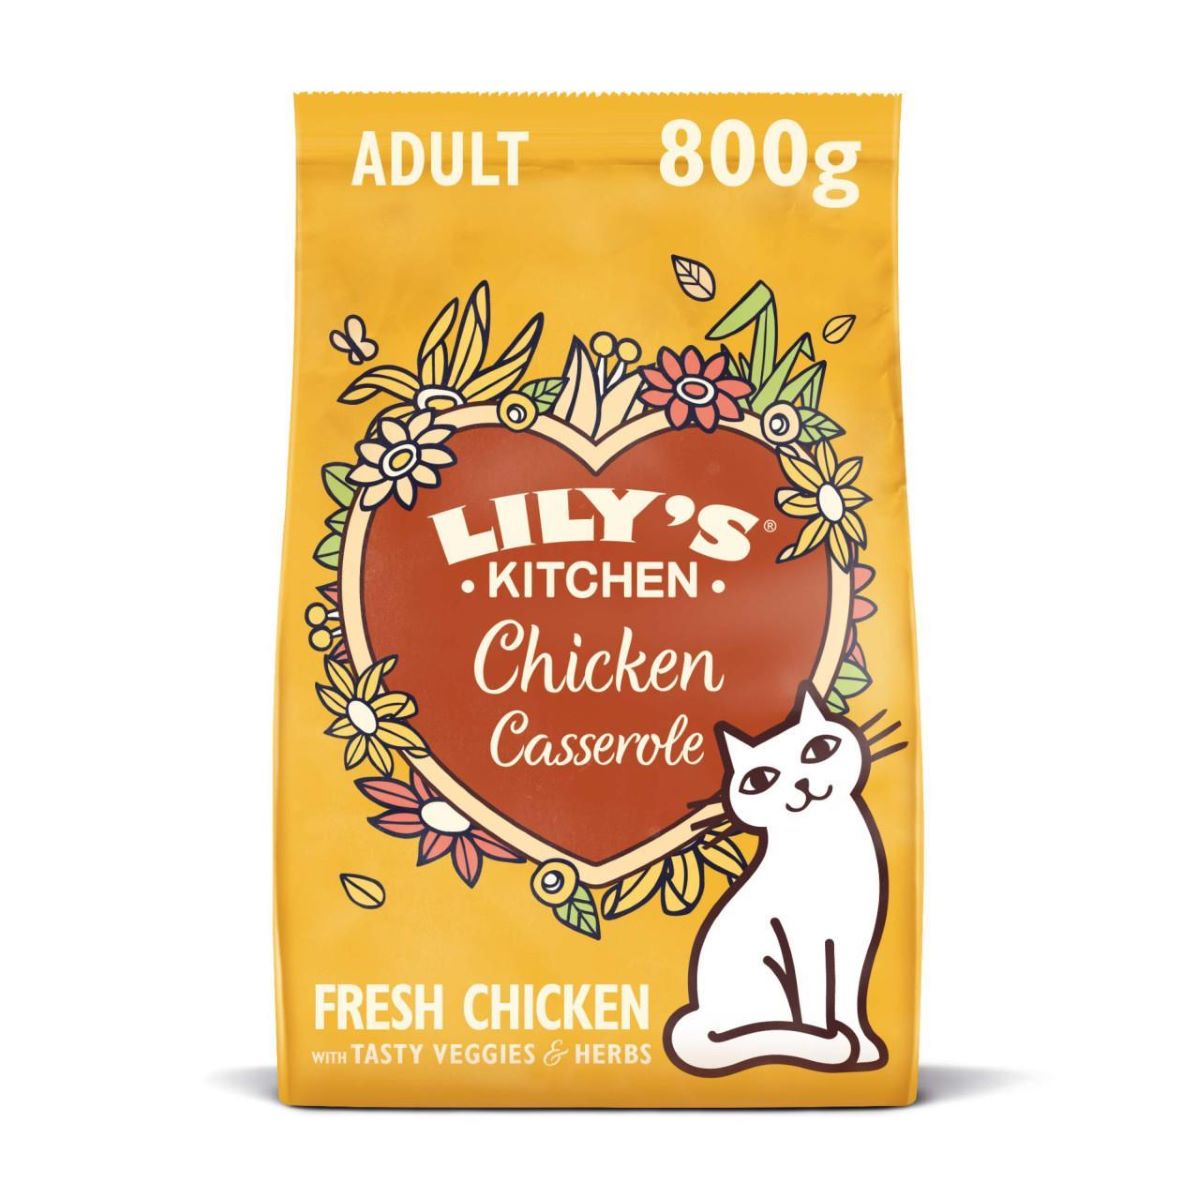 Lily's Kitchen Chicken Casserole Adult Dry Food for Cat 800g